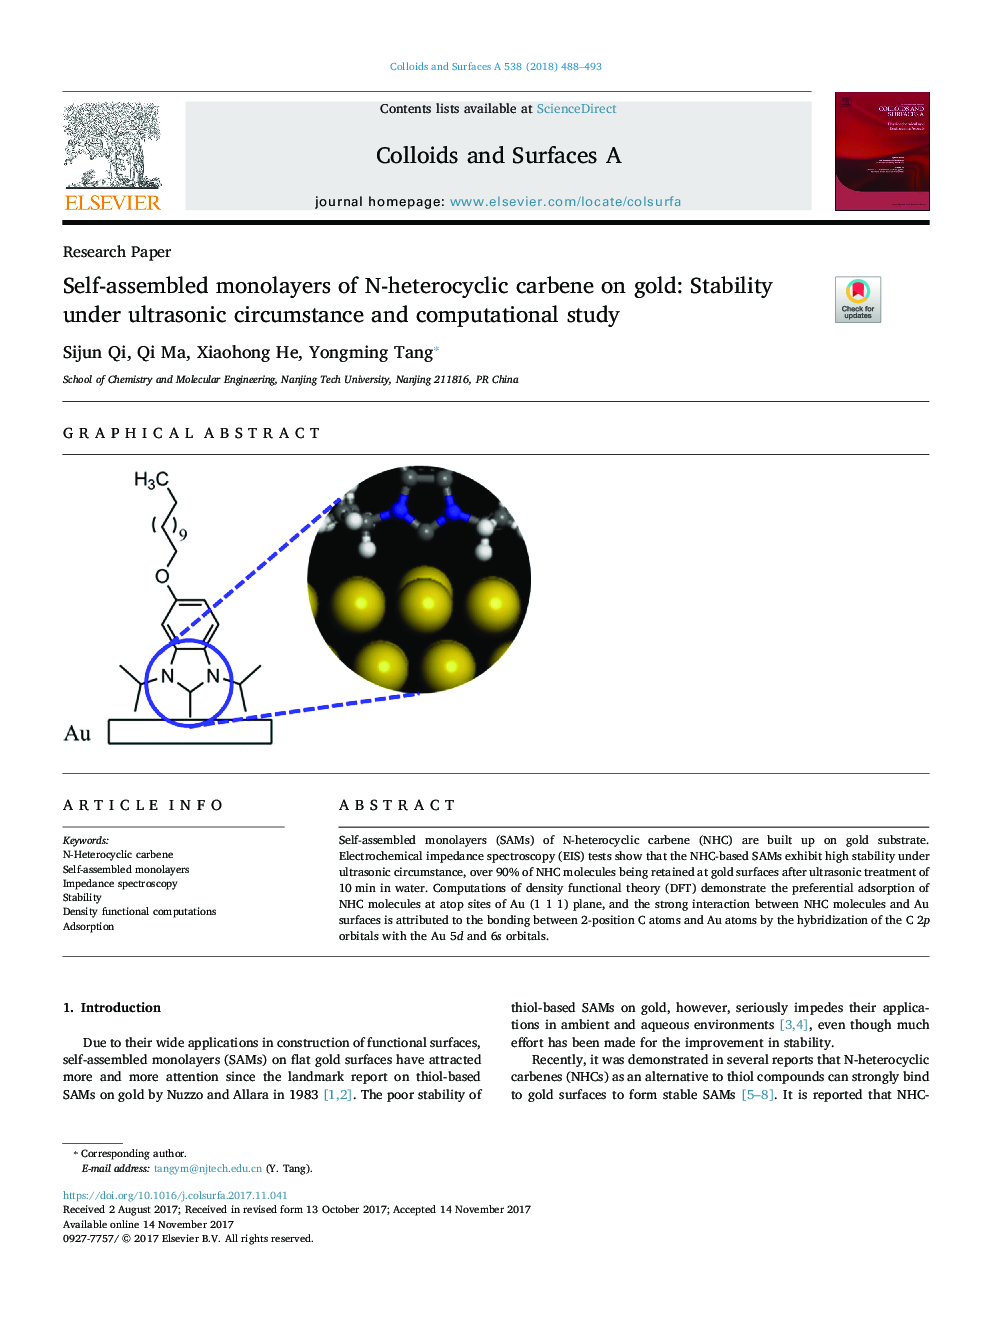 Self-assembled monolayers of N-heterocyclic carbene on gold: Stability under ultrasonic circumstance and computational study